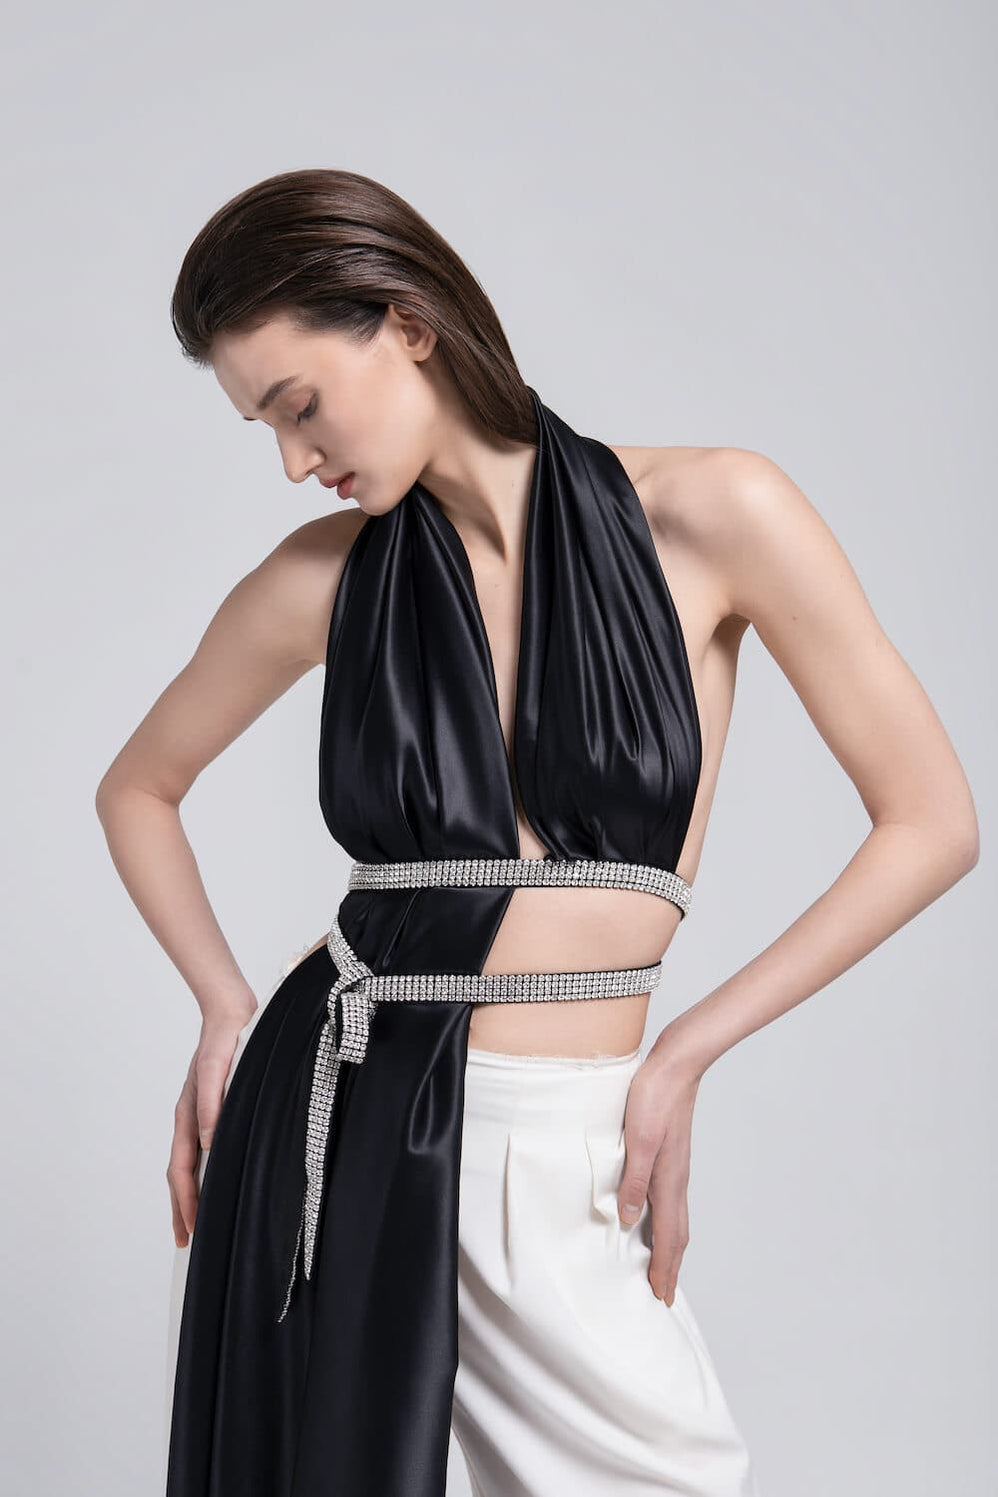 CULT MIA | Discover New Designers & Must-have Fashion